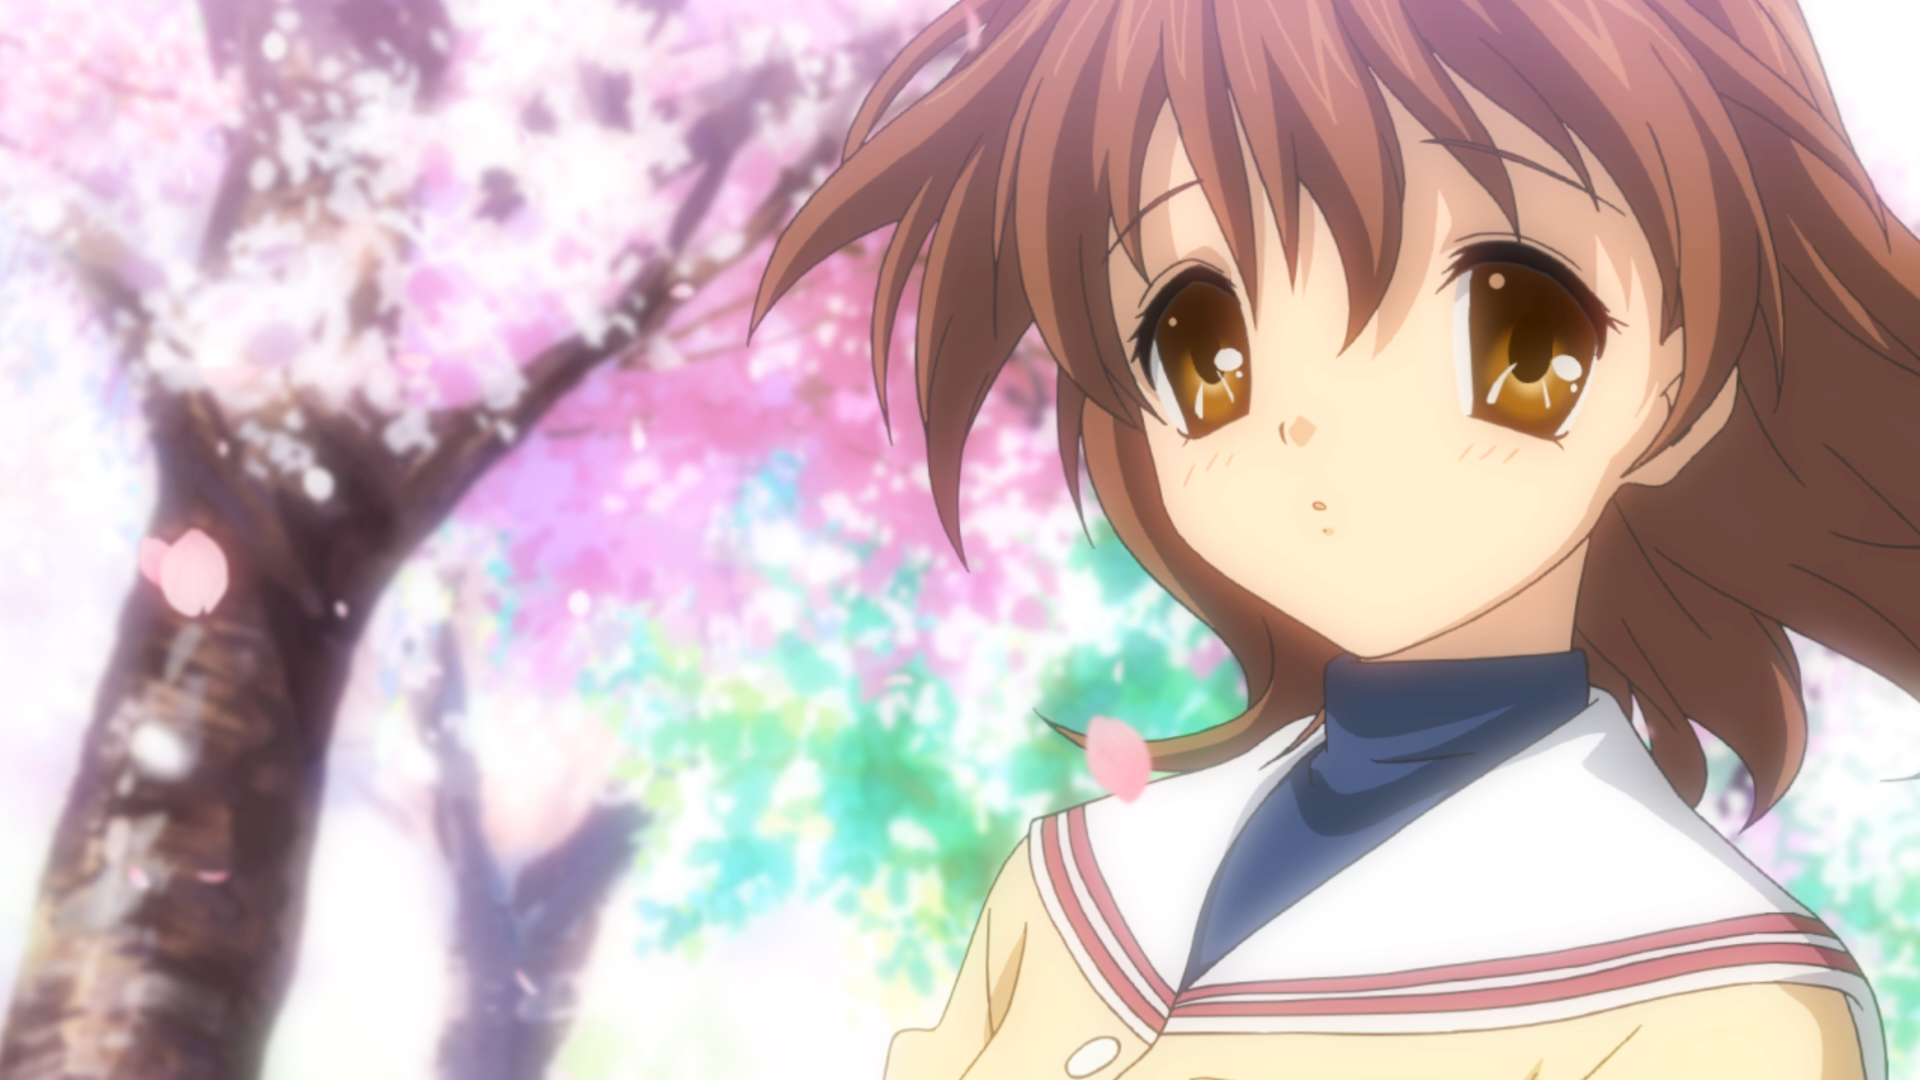 Nice Images Collection: Clannad Desktop Wallpapers